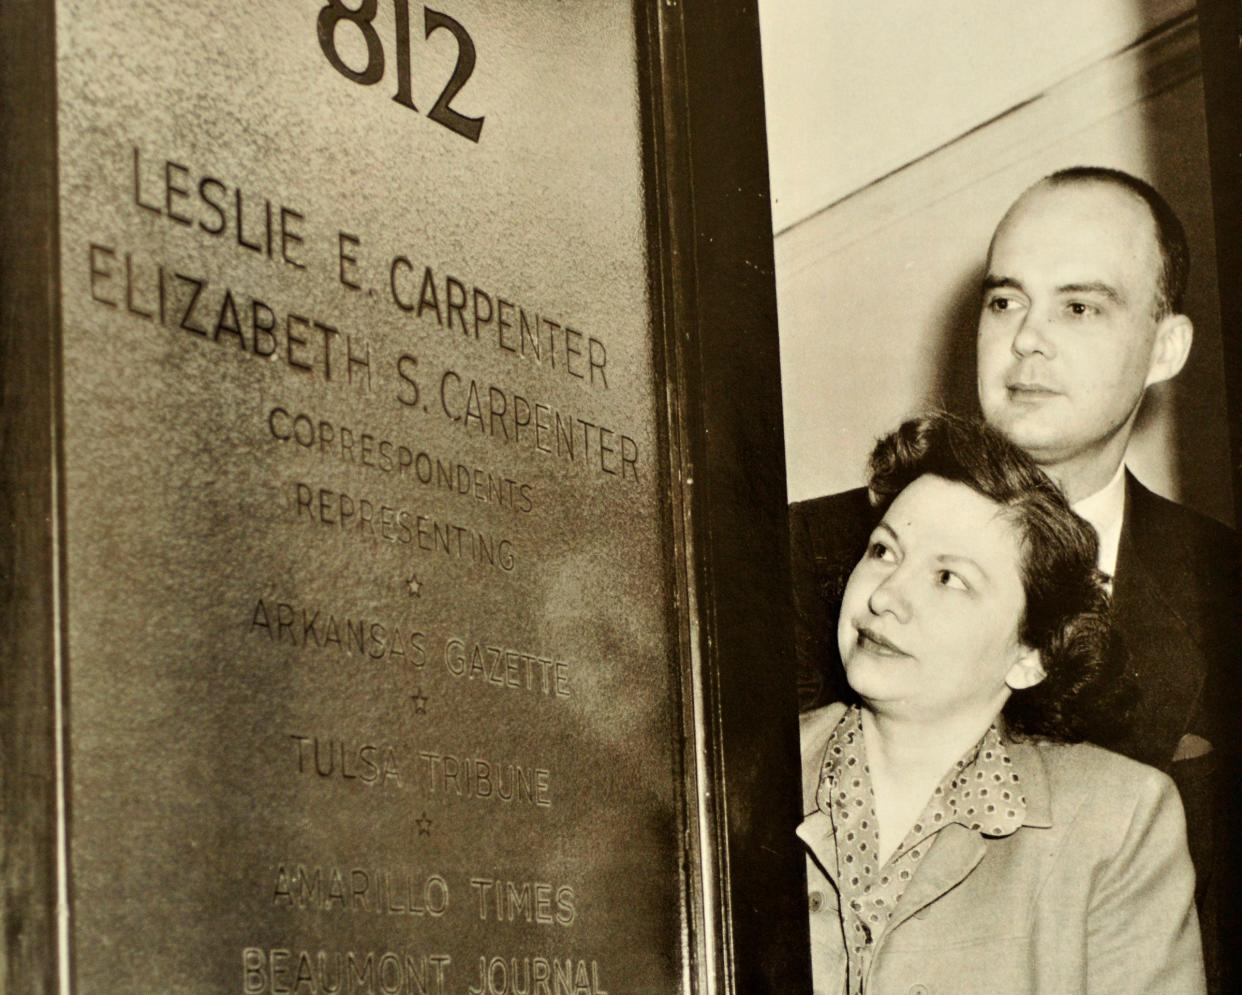 Les and Liz Carpenter, who met working on the Austin High School newspaper, set up their own news bureau at the National Press Building in Washington, D.C.